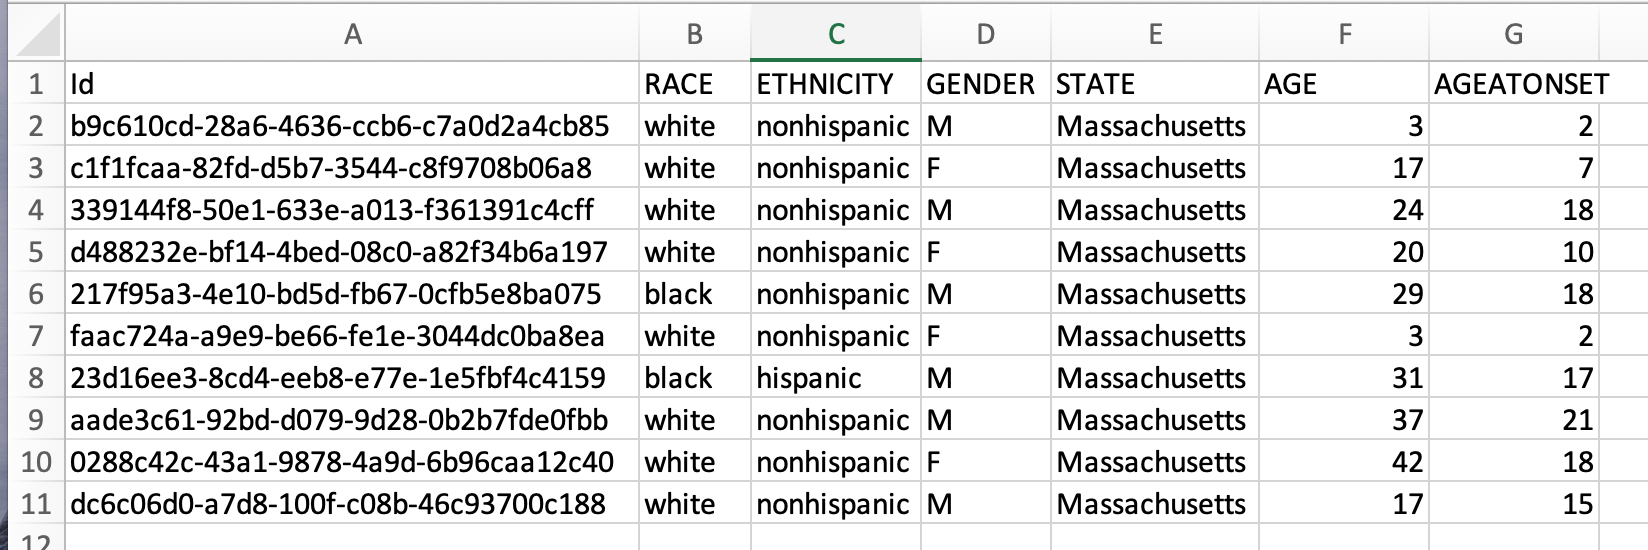 Image of spreadsheet with columns ID, Race, Ethnicity, Gender, State, Age and Age at Onset, with 10 lines of data filled in below for each of these columns. 